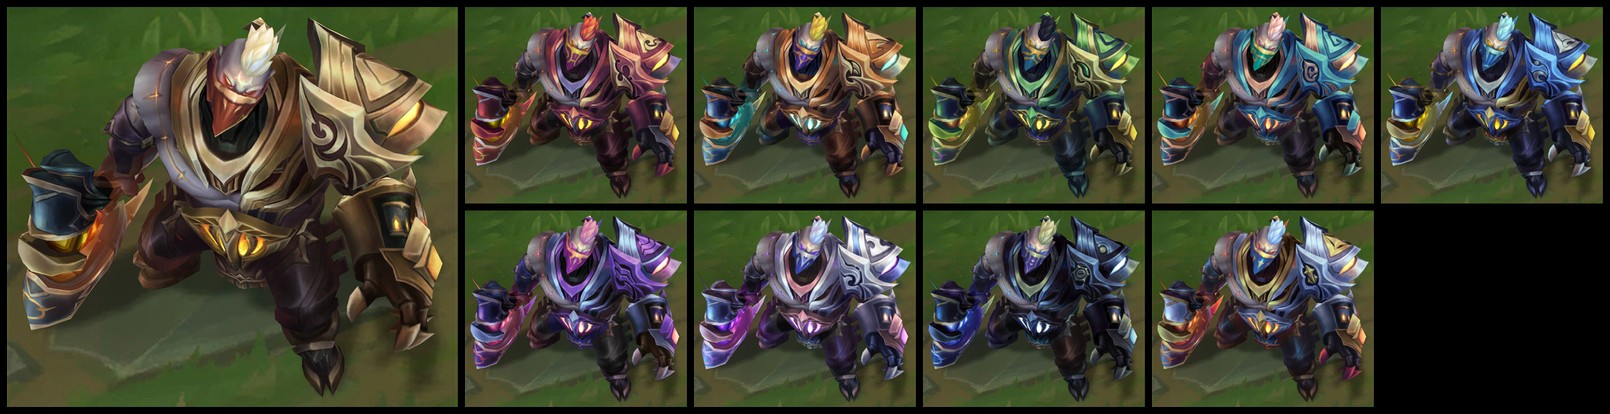 Sion_Sion_HighNoon_Chromas_Fixed_Width.jpg